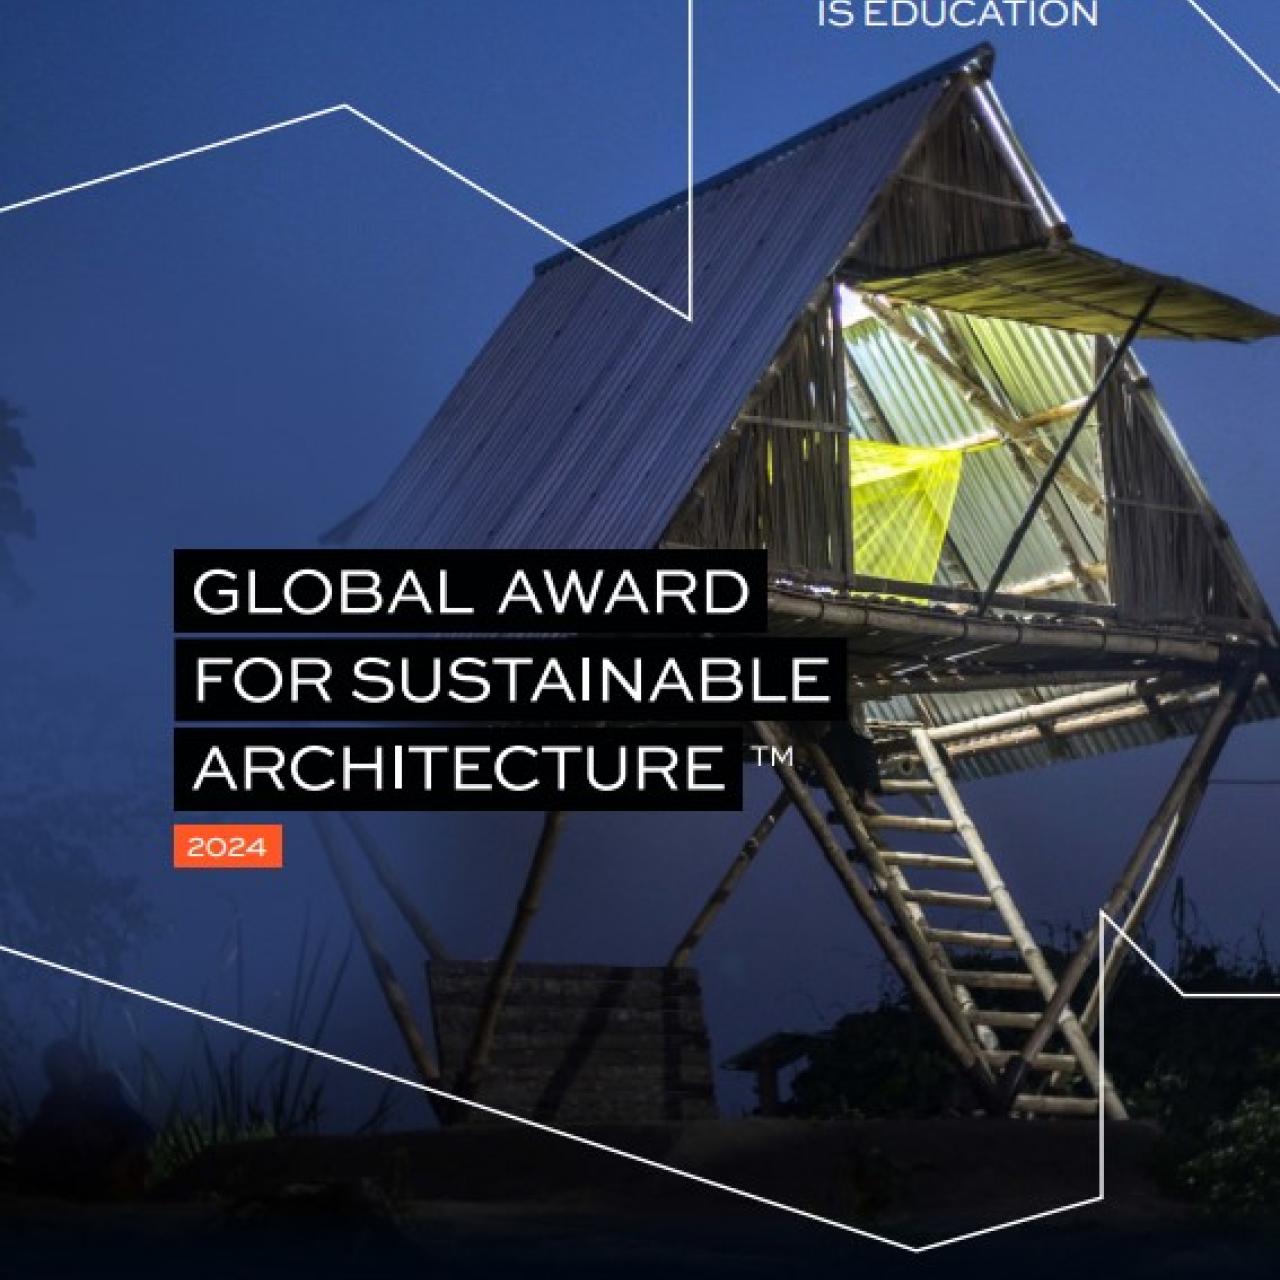 GLOBAL AWARD FOR SUSTAINABLE ARCHITECTURE